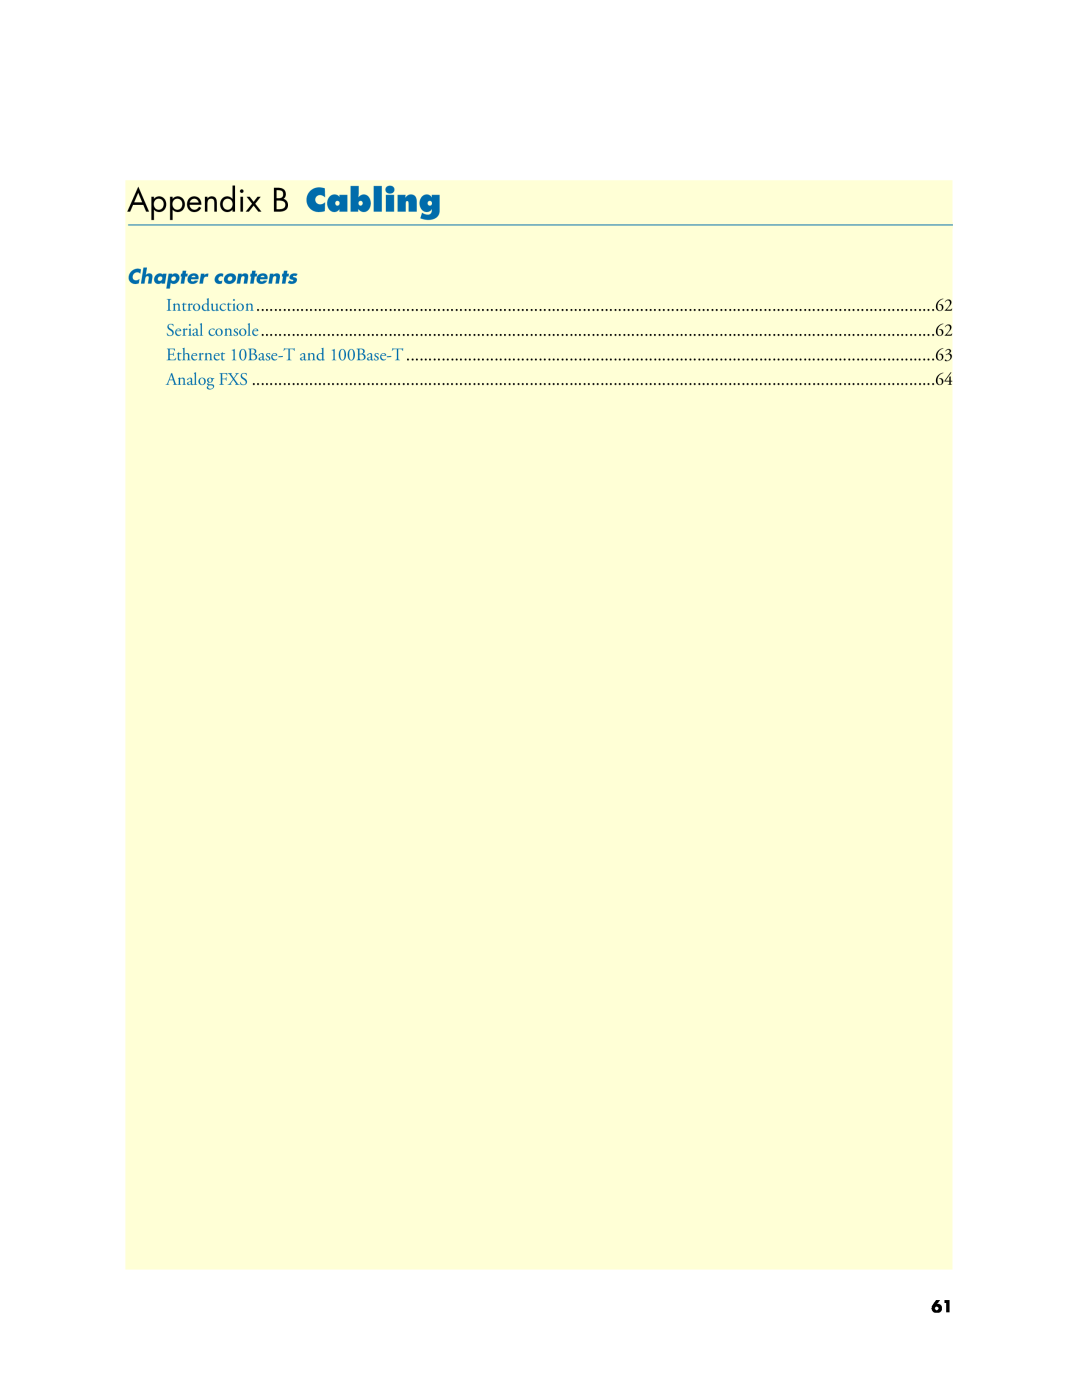 Patton electronic 4110 manual Appendix B Cabling, Chapter contents 